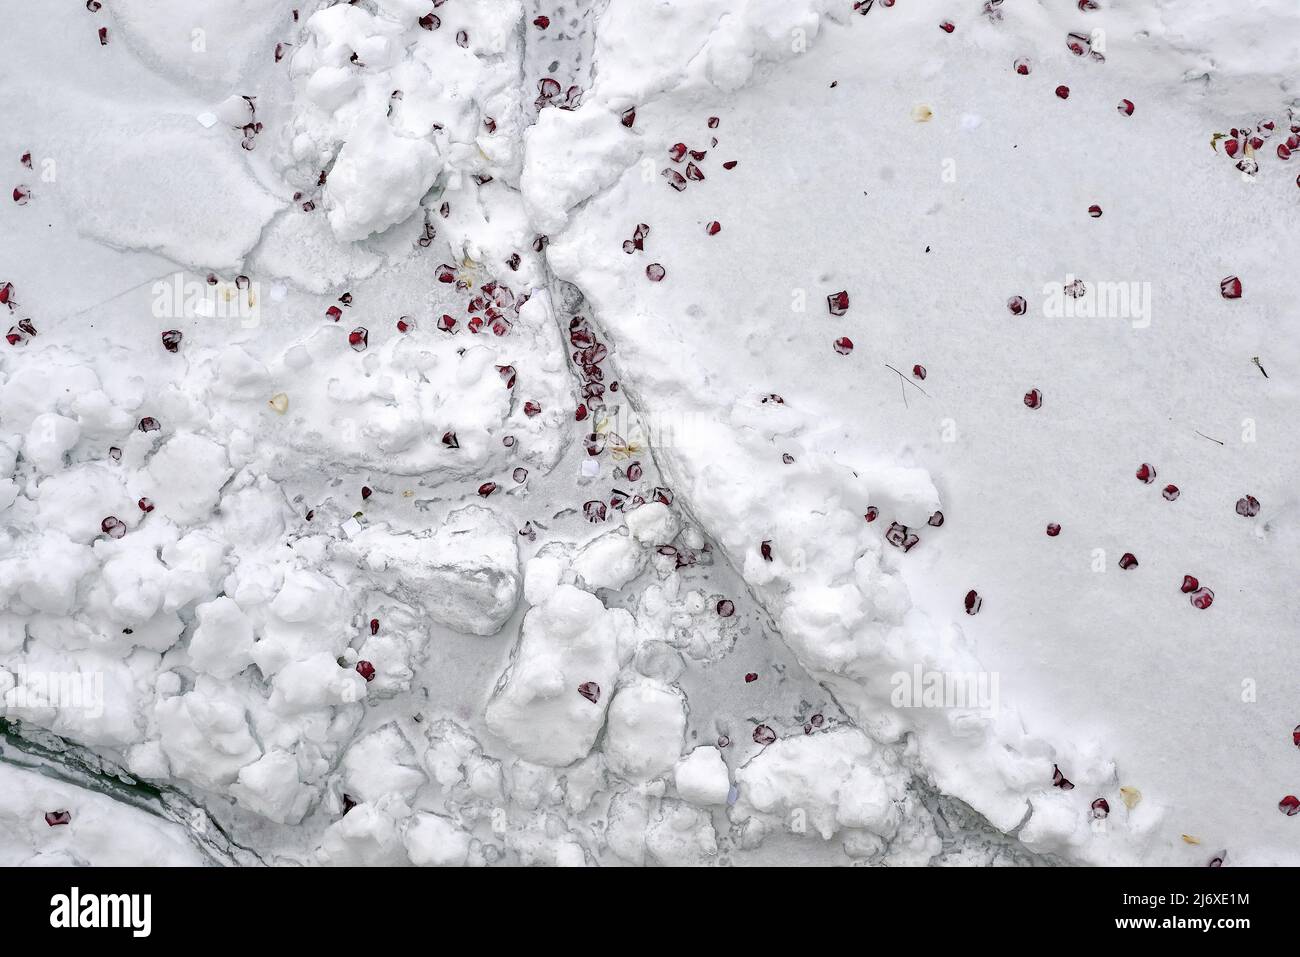 looking down at red petals strewn in ice and snow Stock Photo